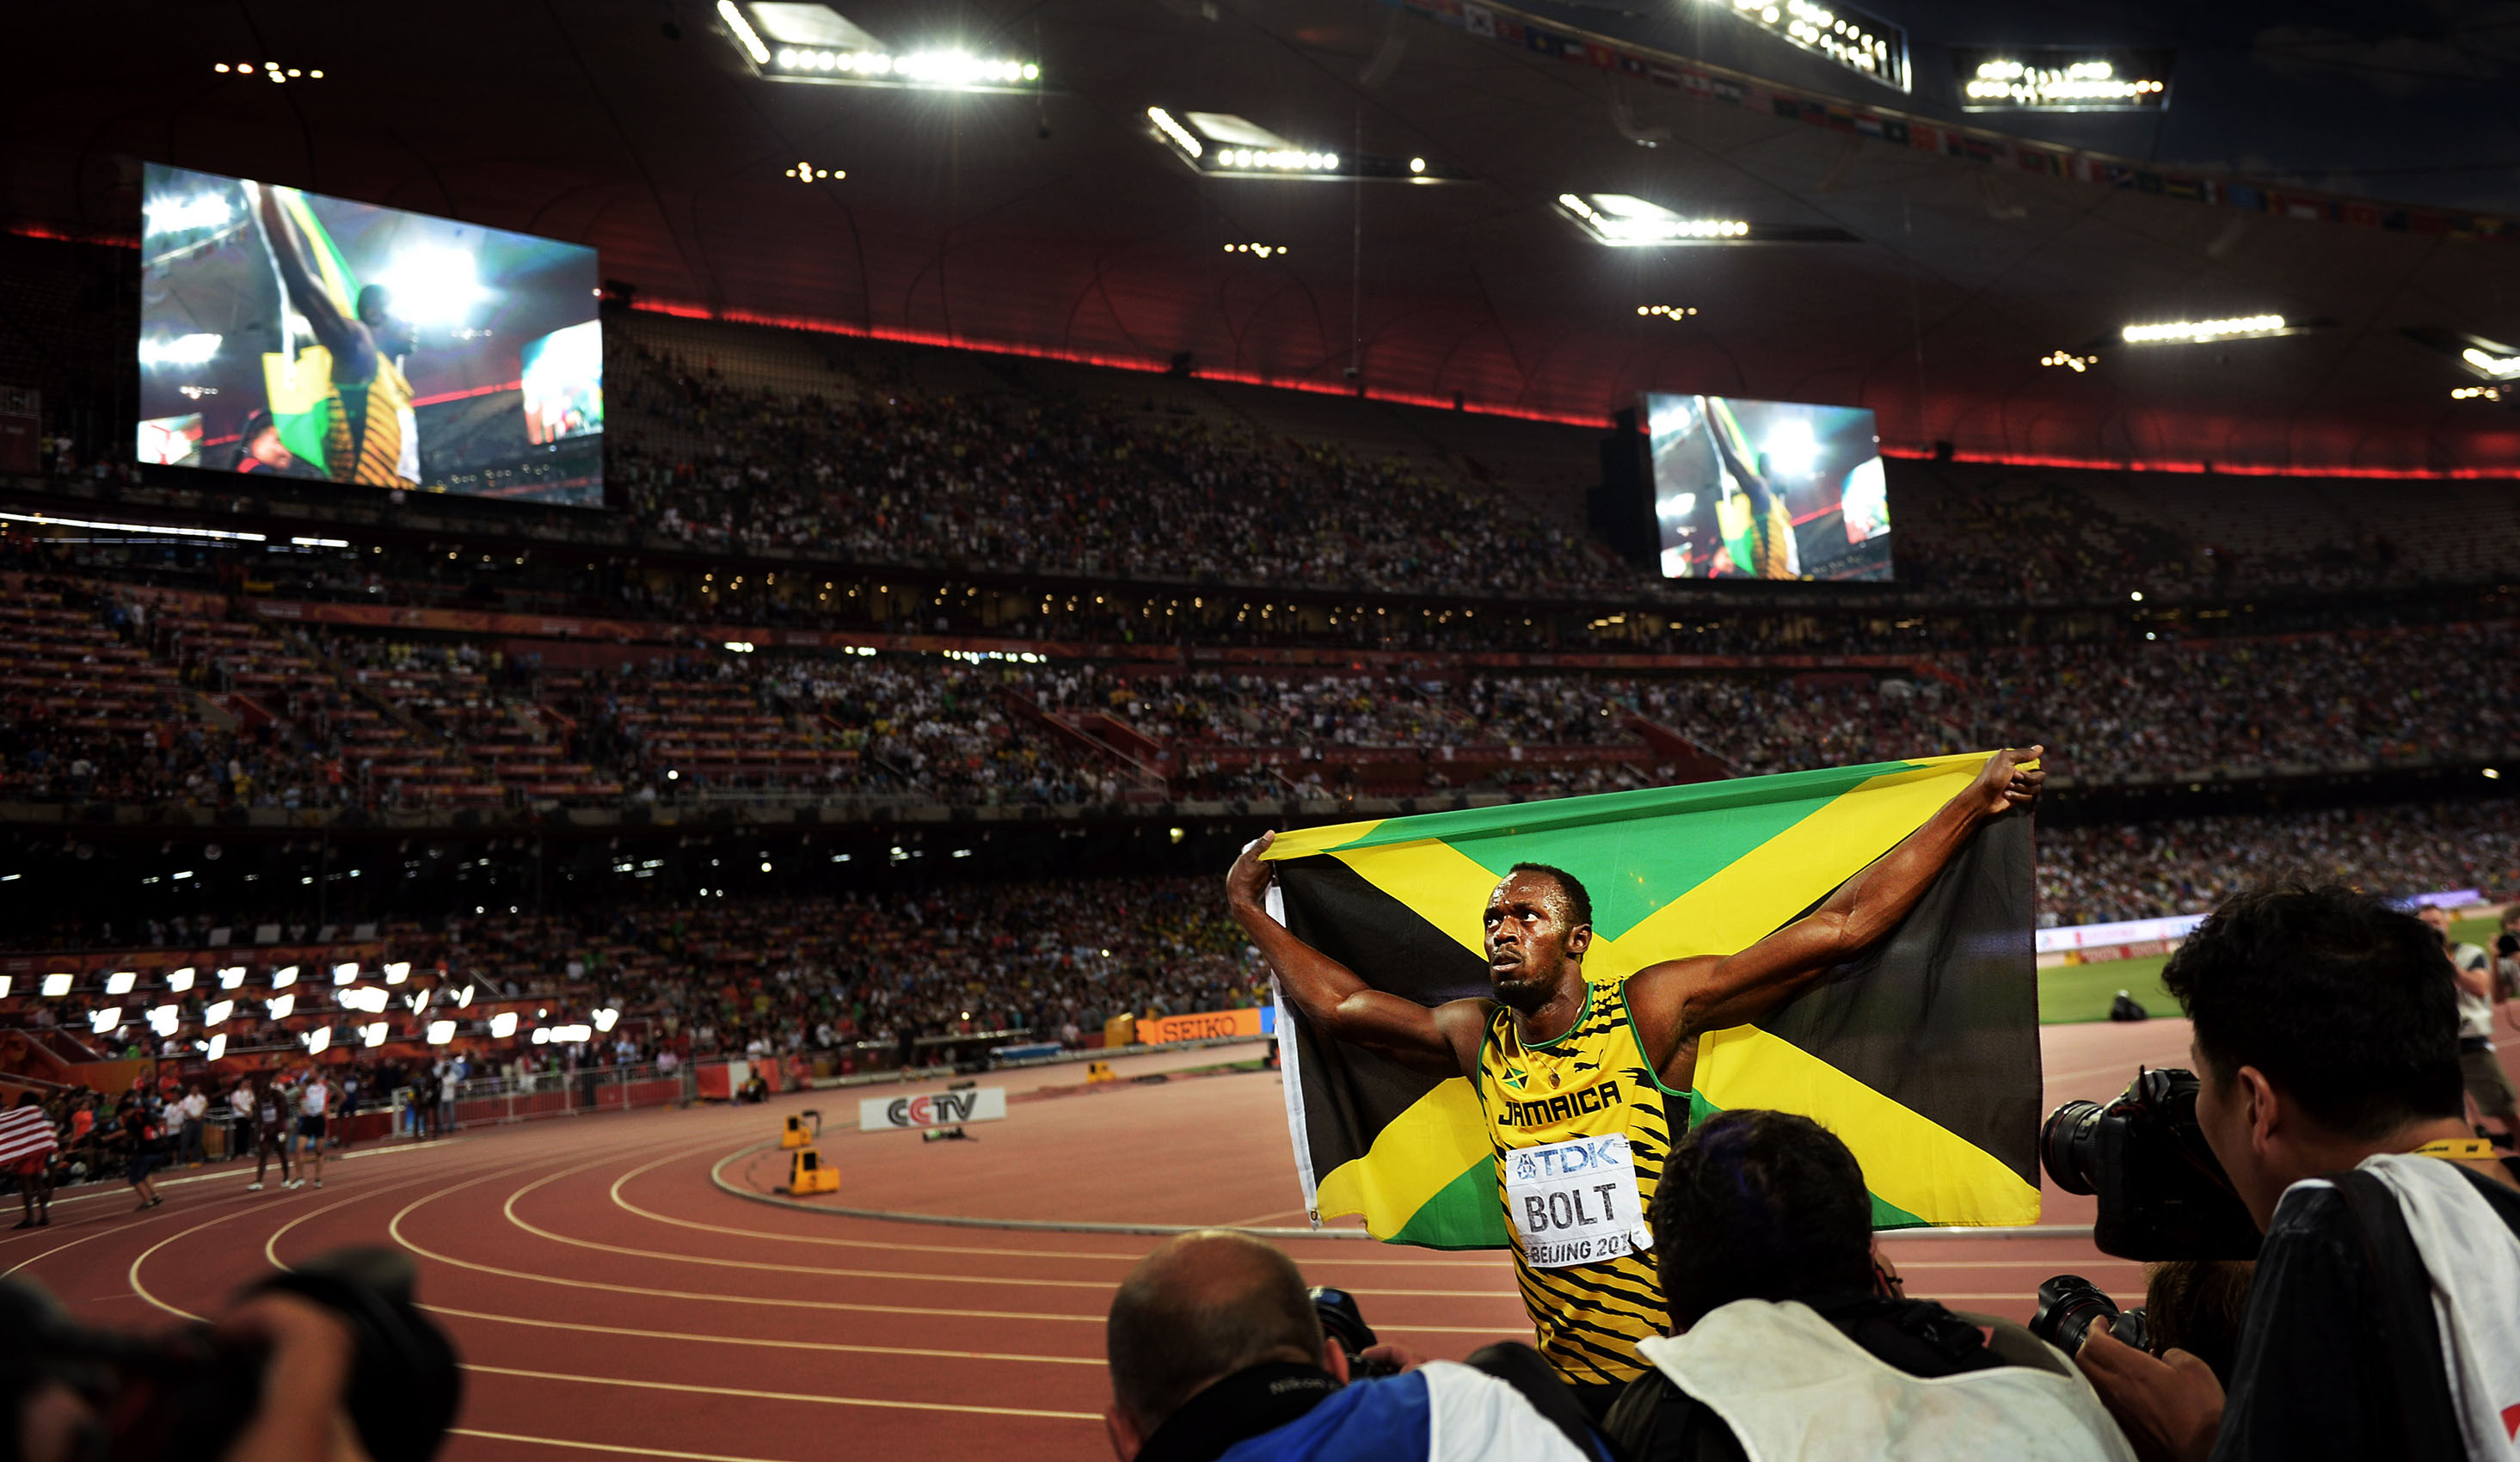 Usain adds the 200m gold to complete the sprint double